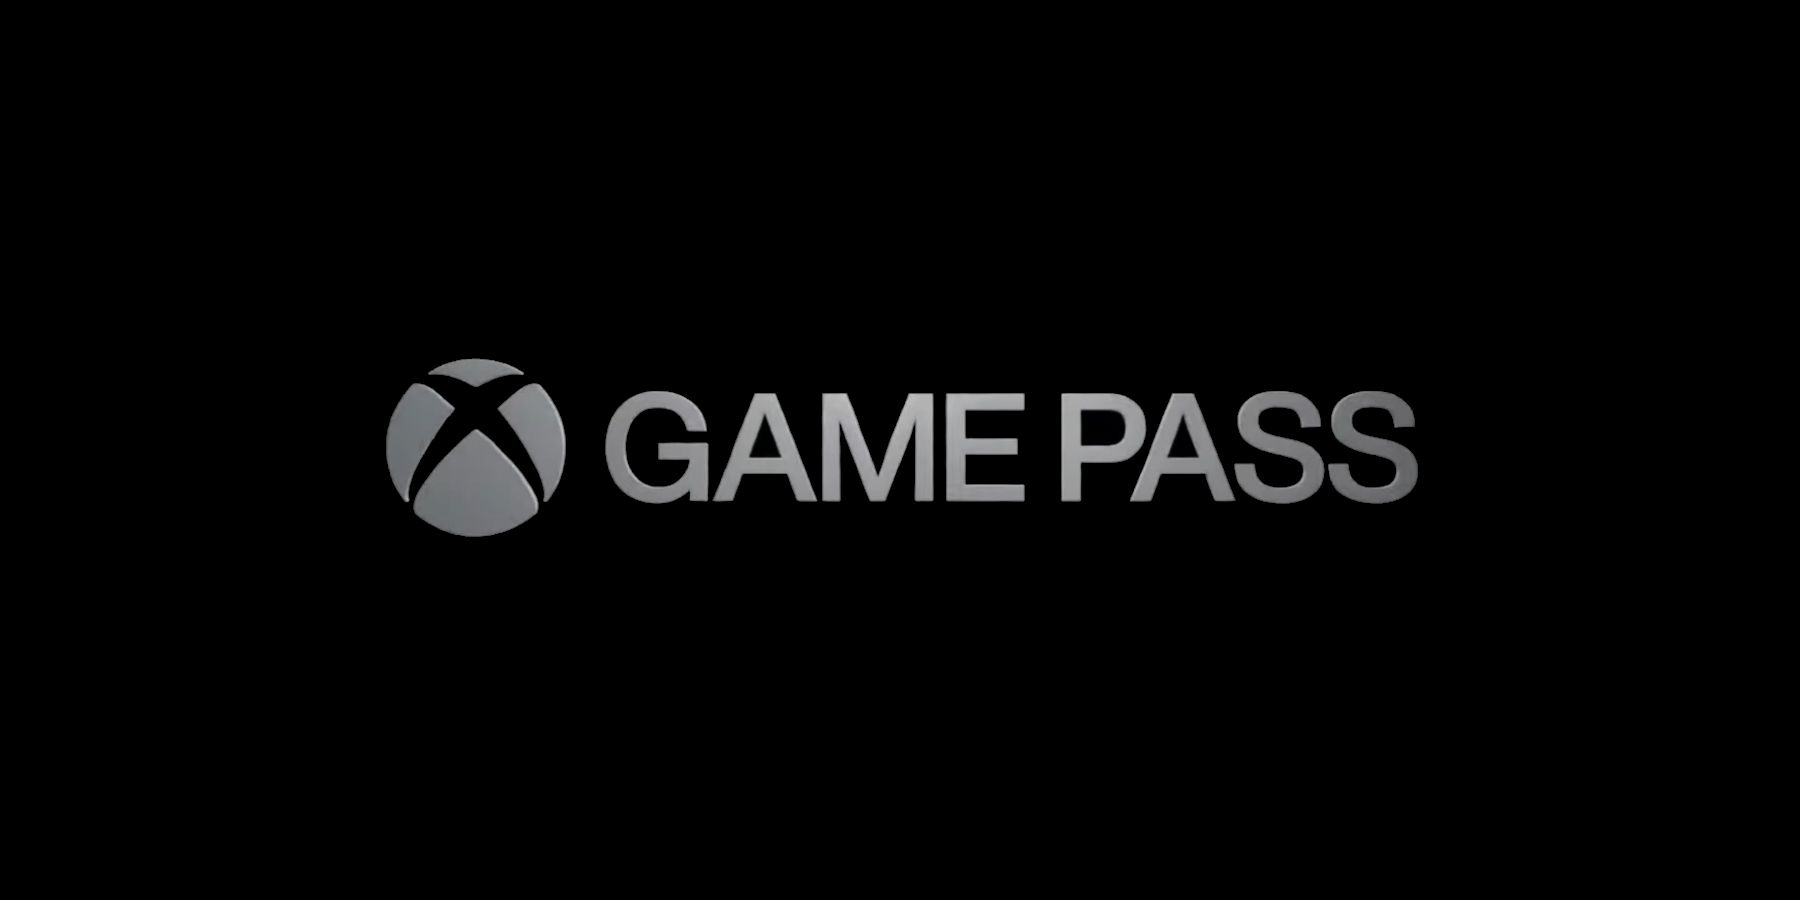 Back 4 Blood, Destiny 2: Beyond Light for PC, and more coming to Xbox Game  Pass